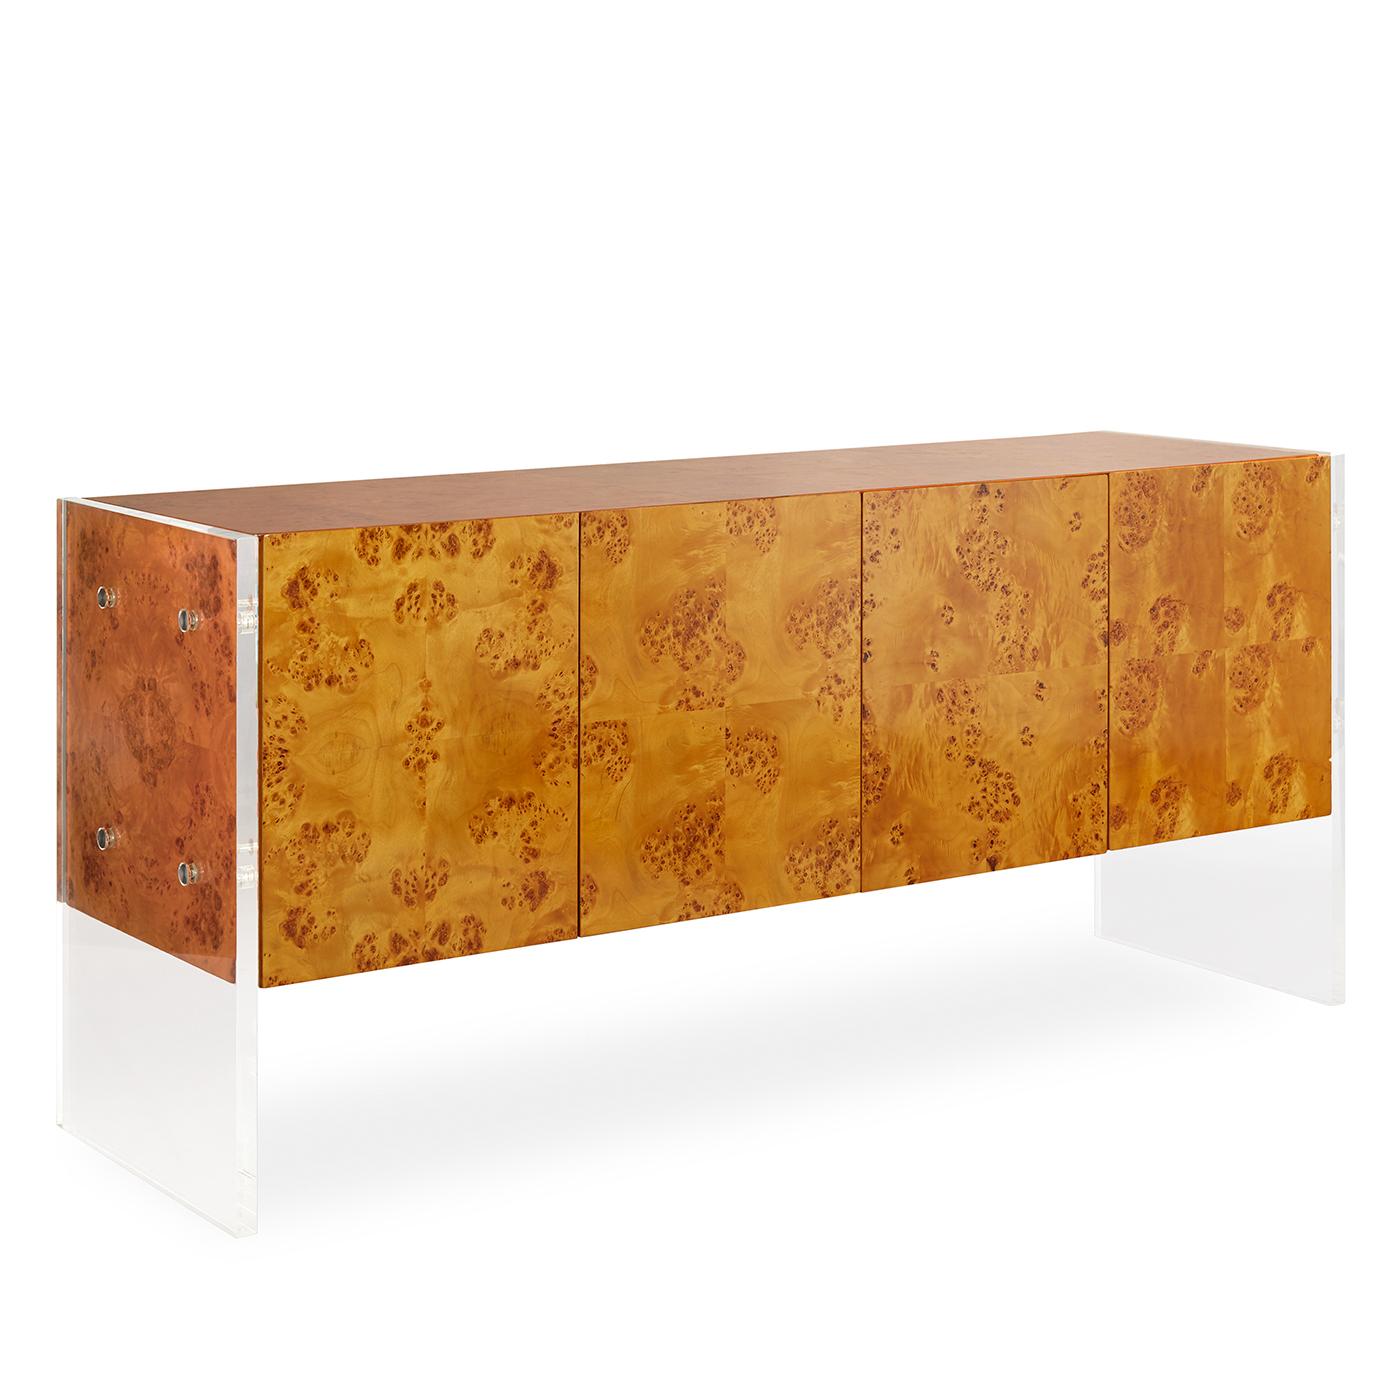 Timelessly Chic. Pieced, burled mappa between Lucite legs with stainless steel accents. Pieced veneer cabinet faces showcase naturally occurring patterns in the wood, and an adjustable shelf inside provides posh storage. With a fully finished back,